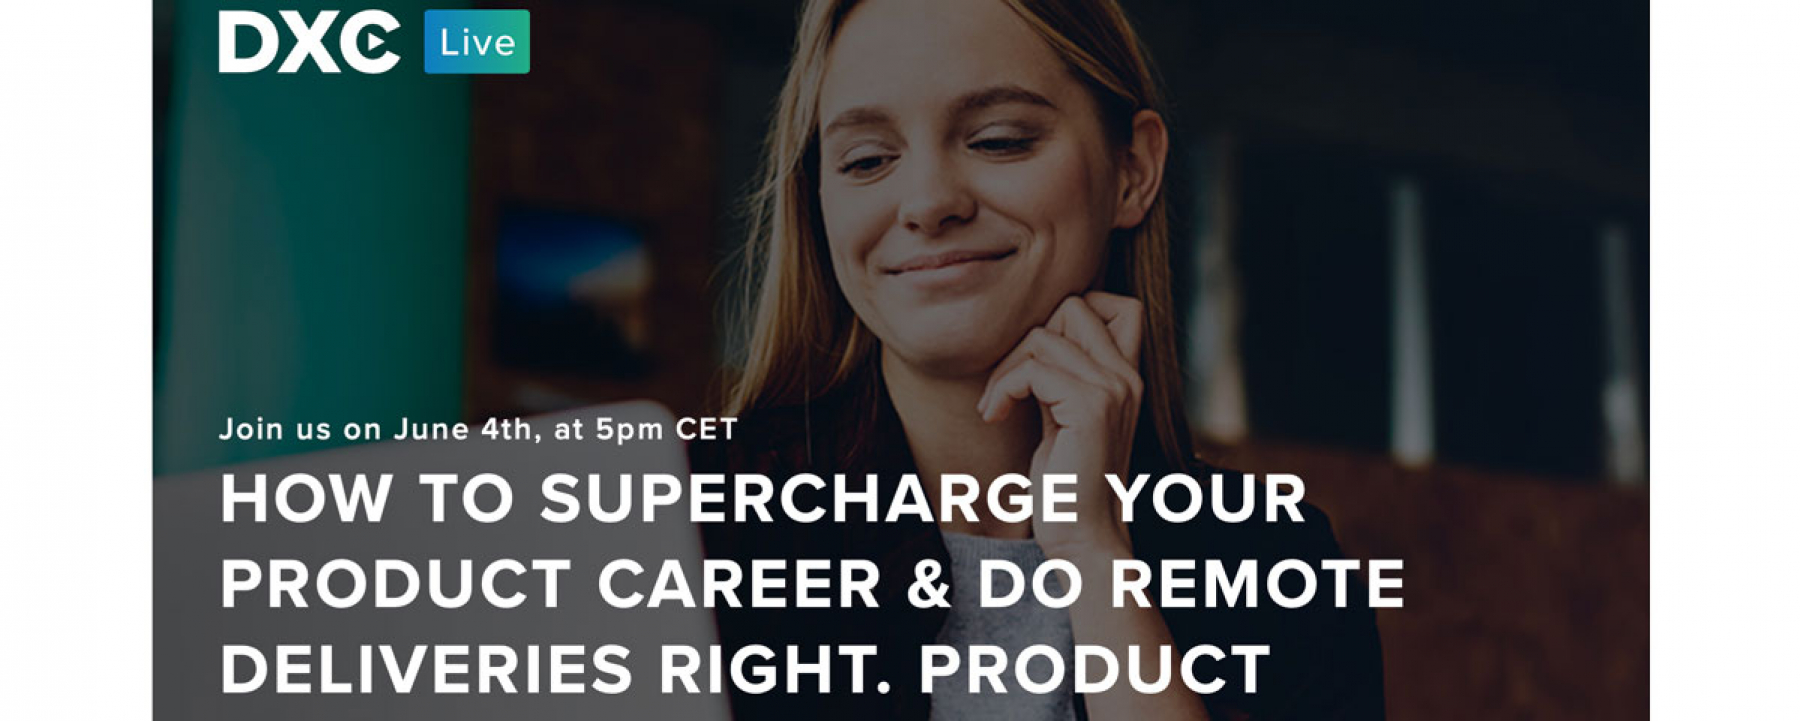 DigitalXChange Live : How to supercharge your product career